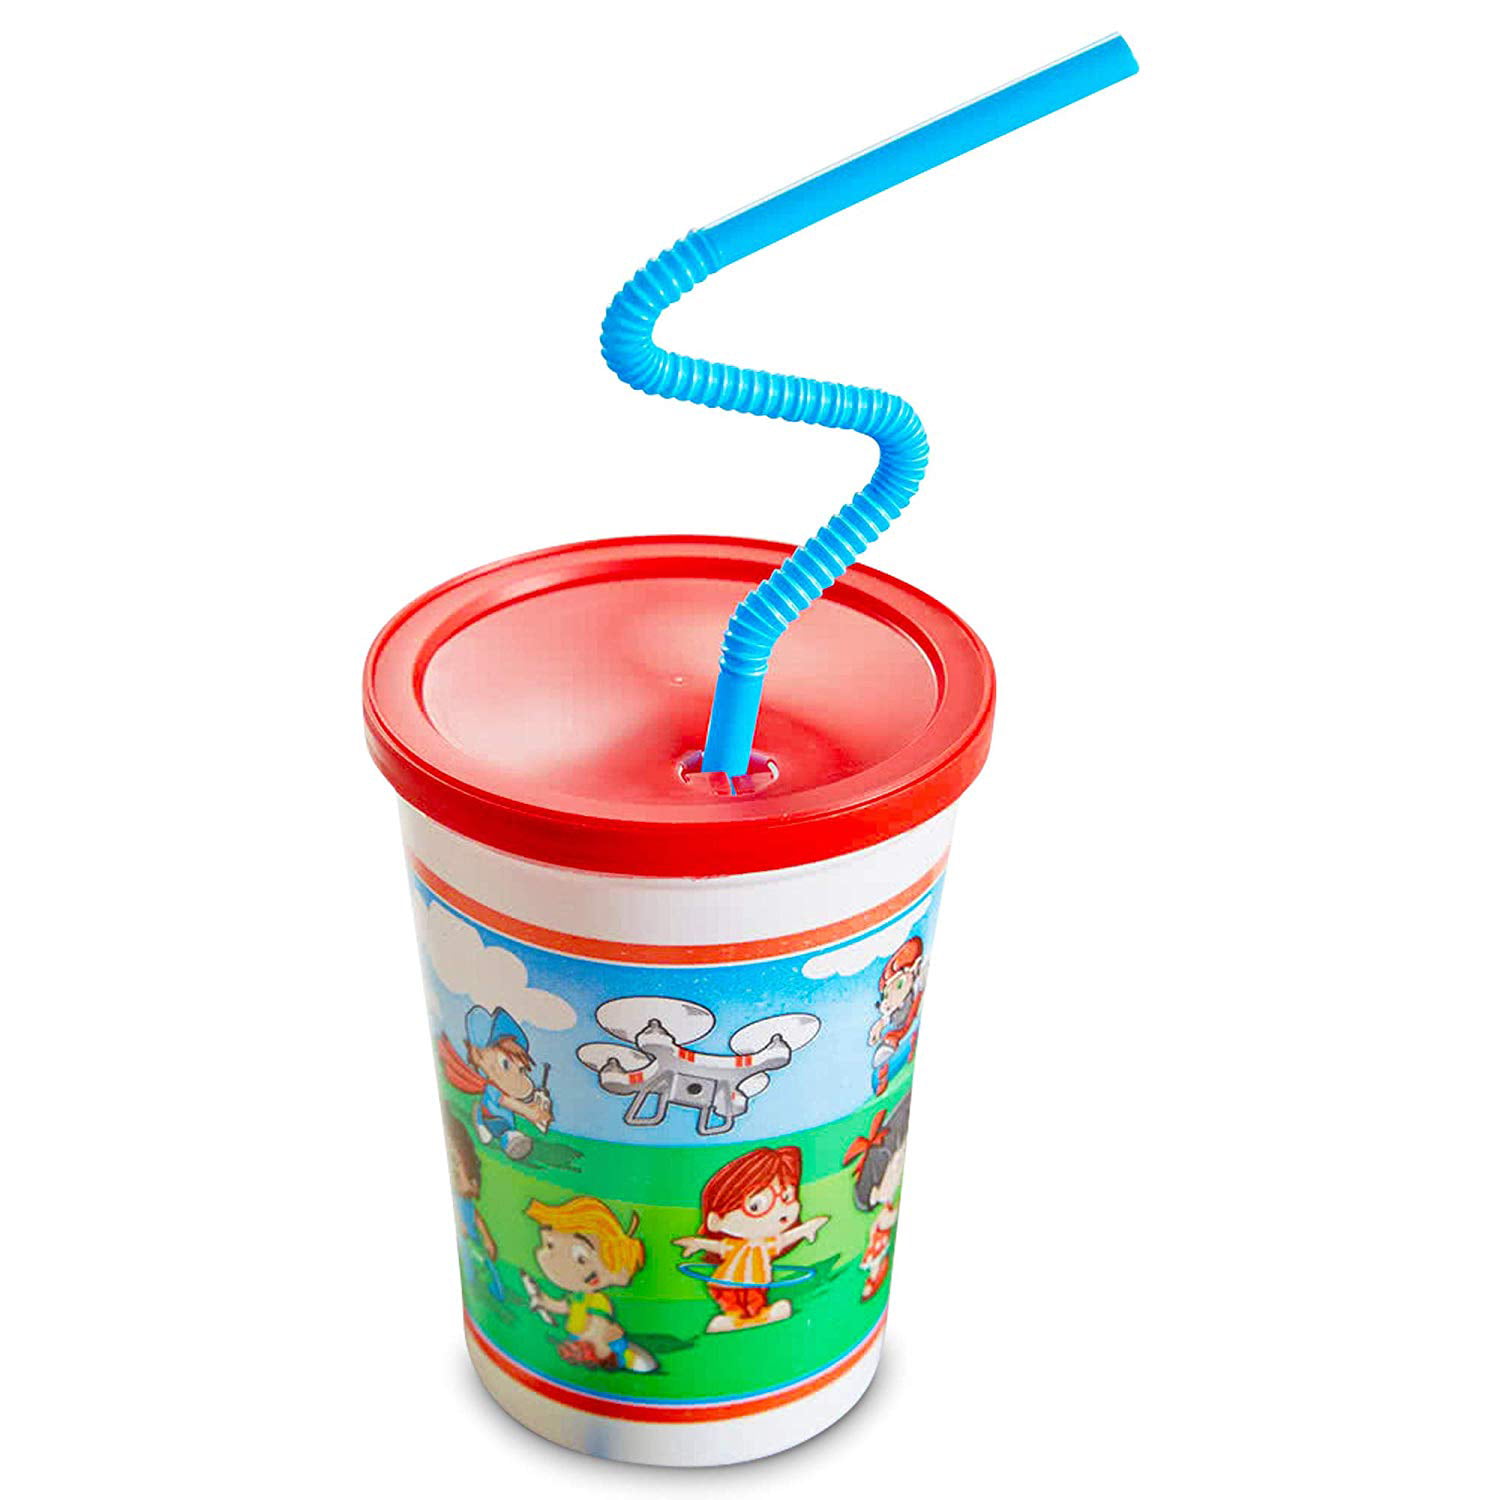 Clean Cup for Kids. Cup Design for child. The Final Straw for Kids. Kids cup